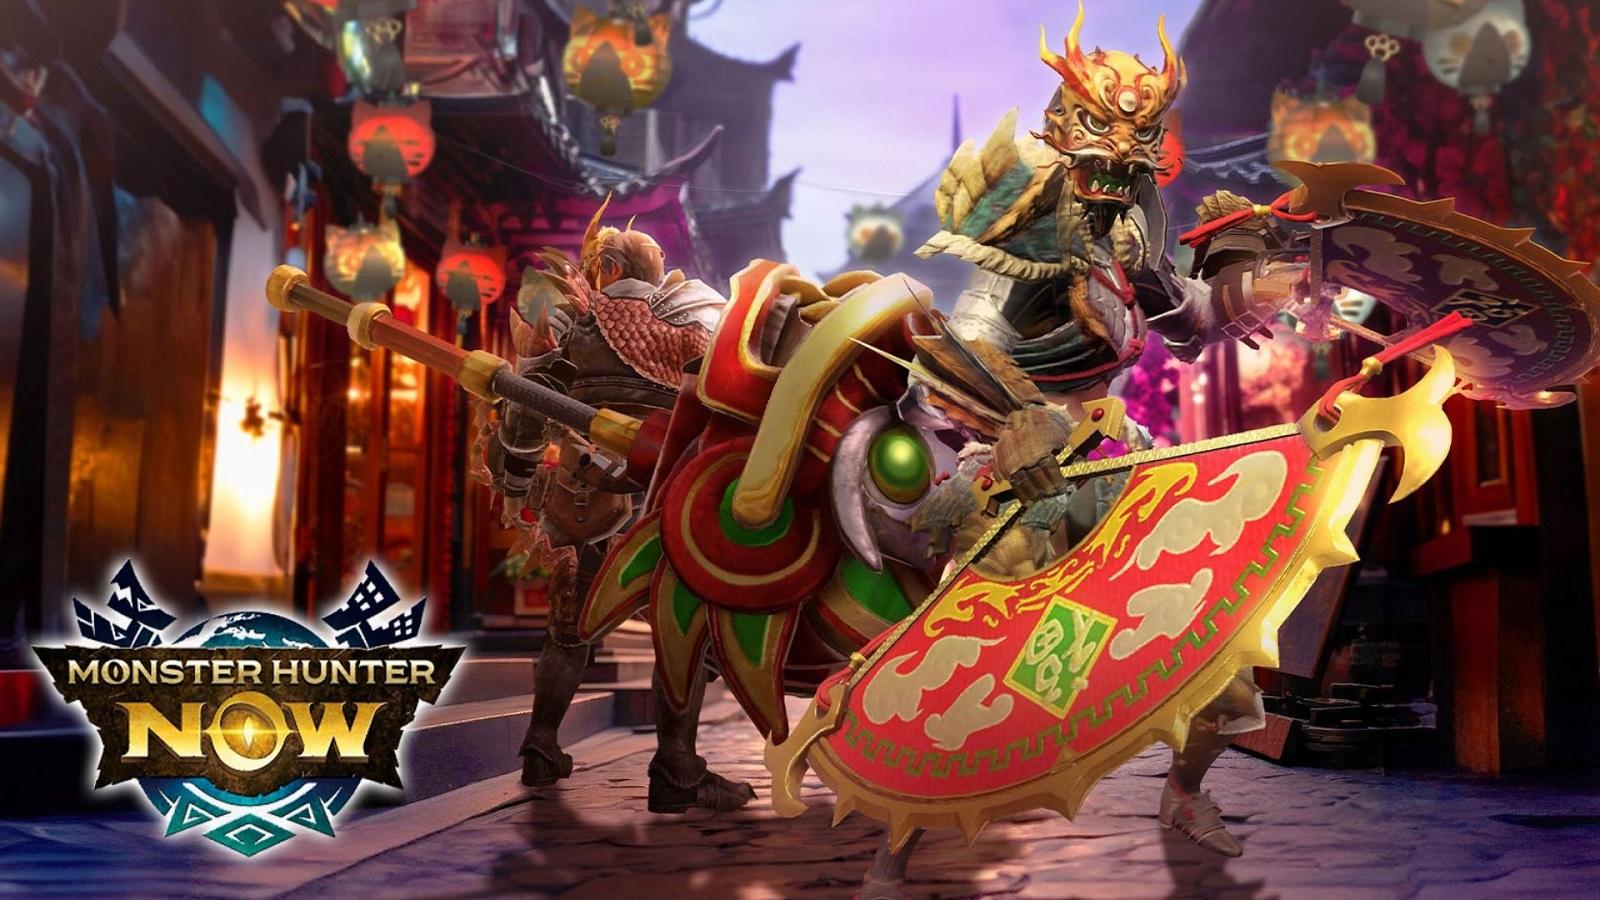 Monster Hunter Now Lucky Lunar New Year event armor and weapons